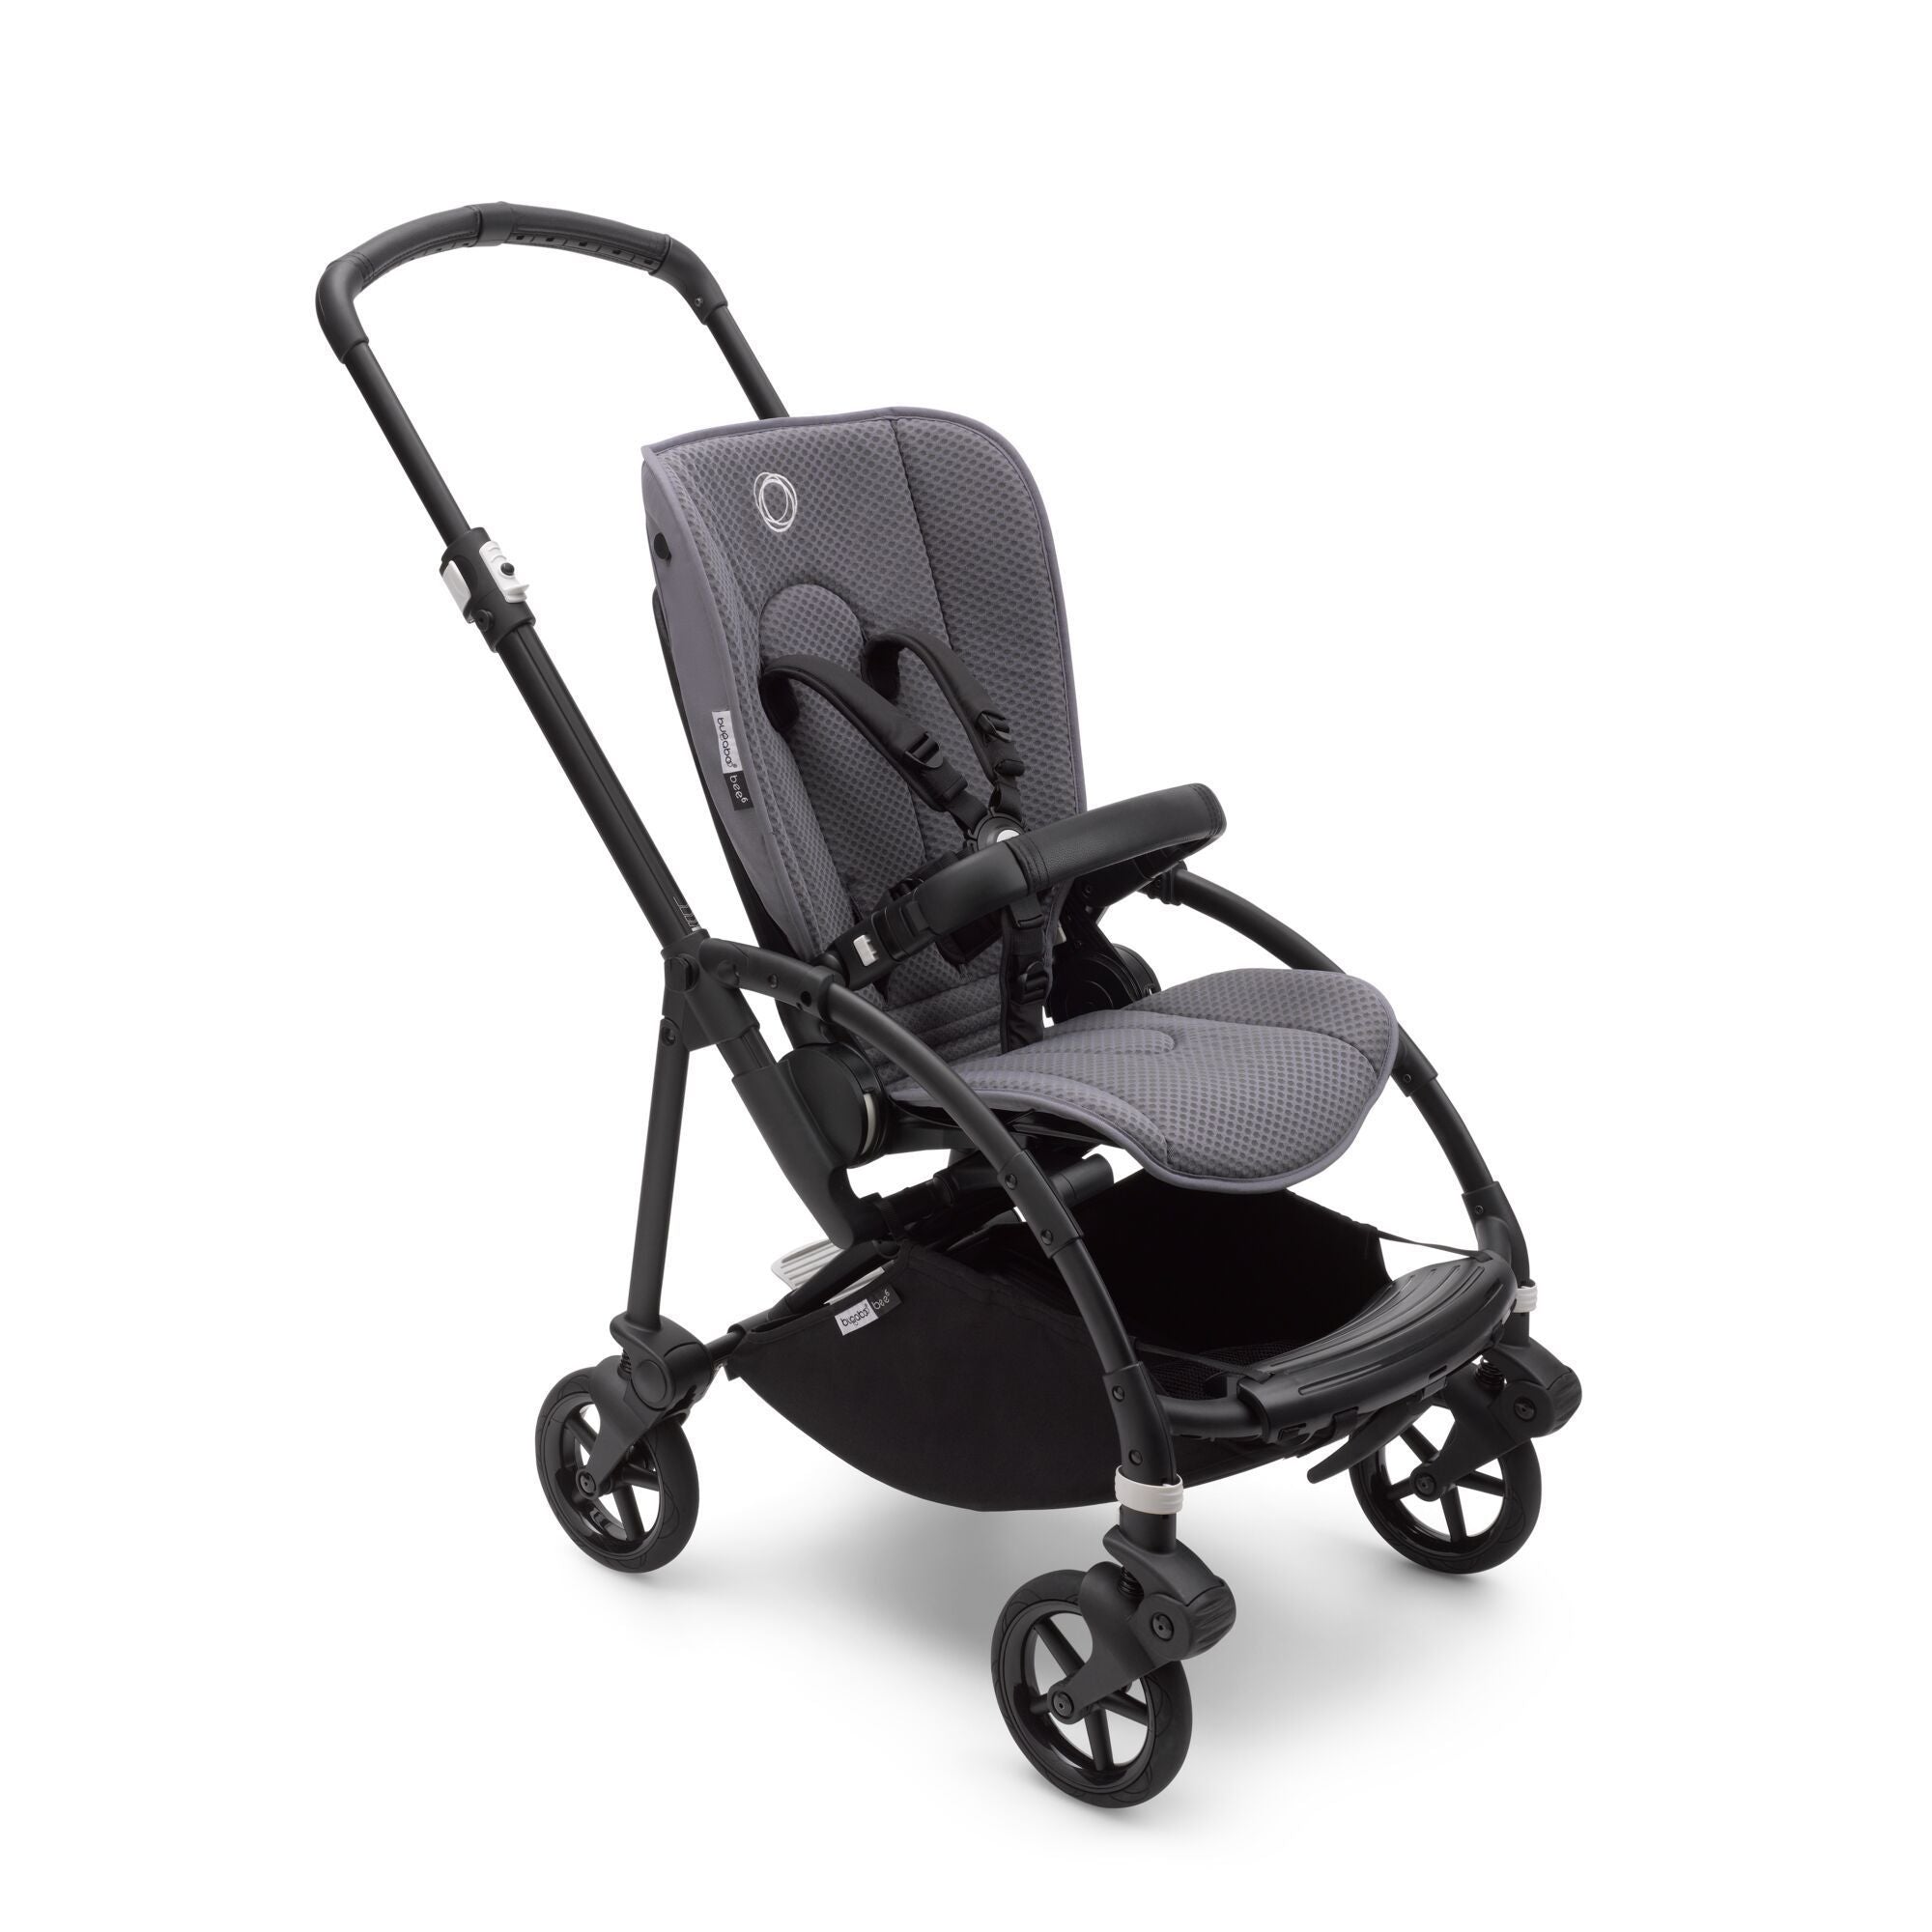 Bugaboo Bee 6, An Impartial Review: Mechanics, Comfort, Use 